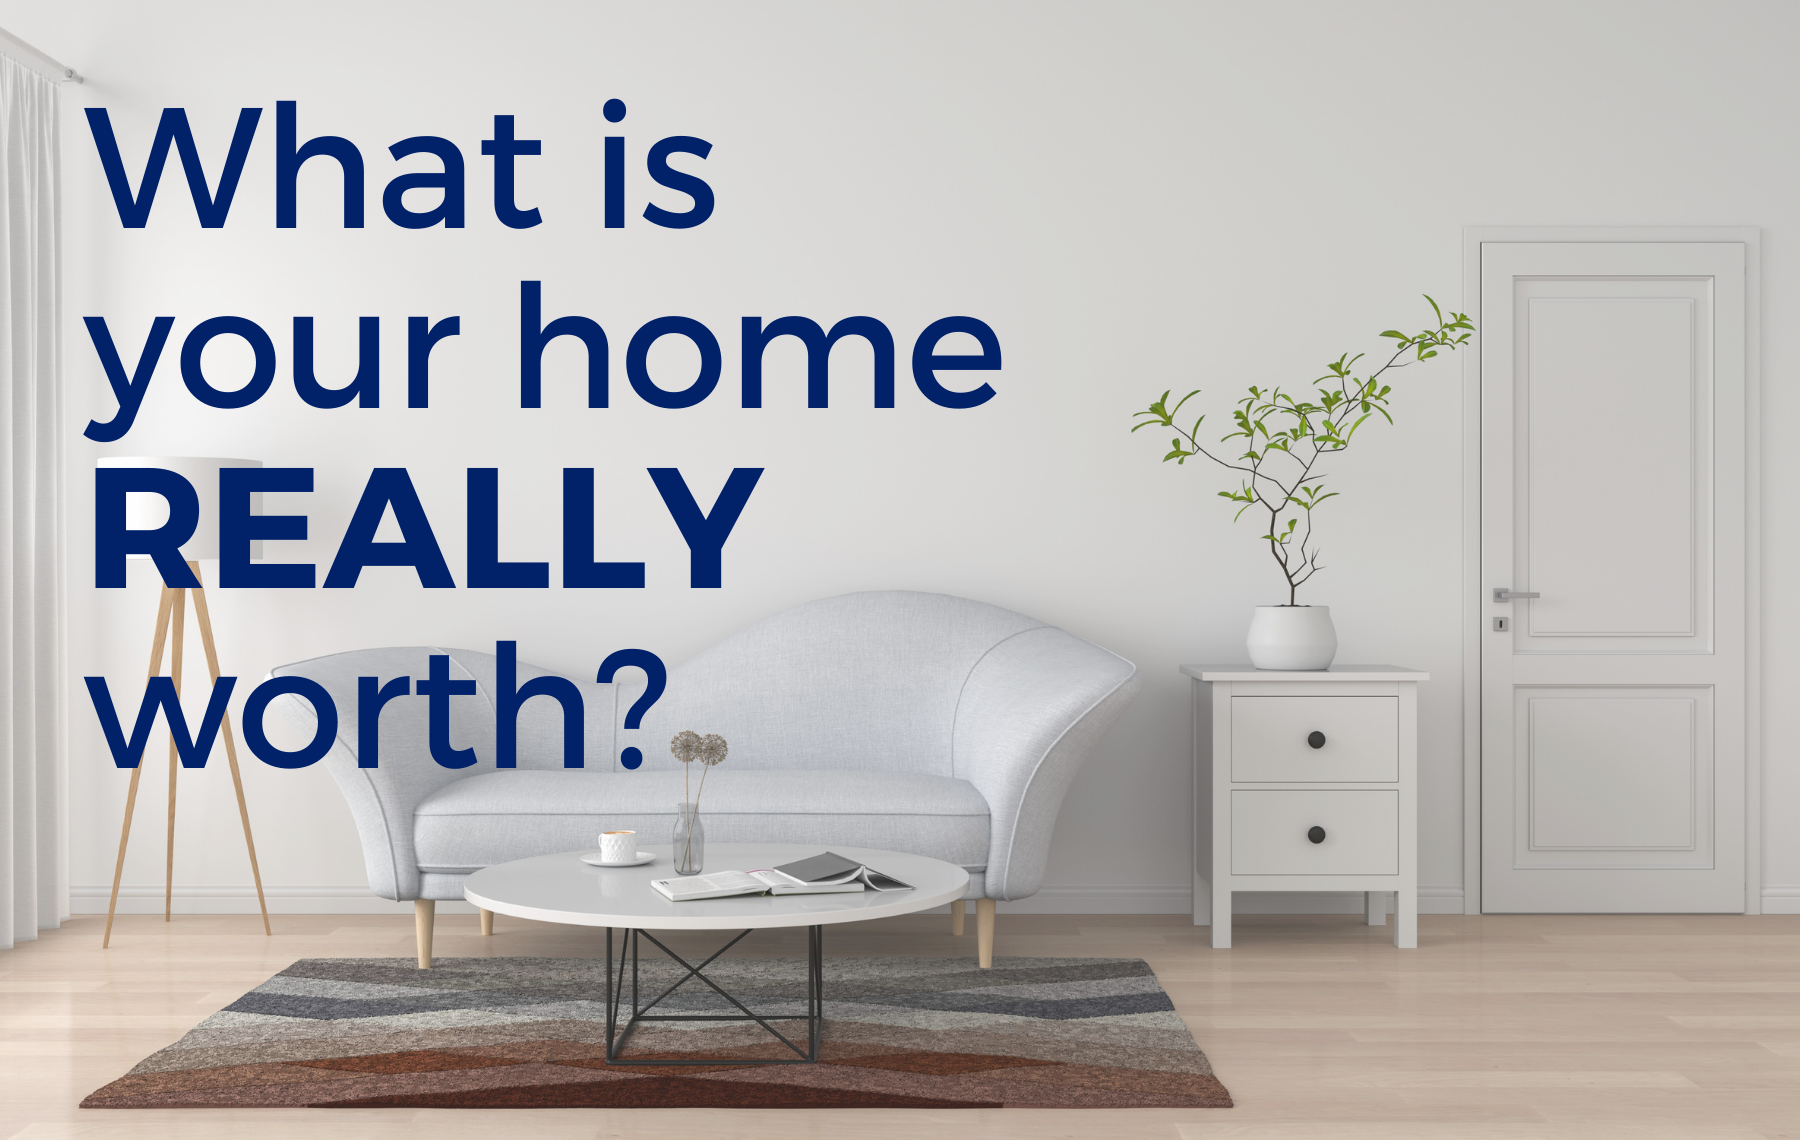 what is your home worth (600 × 380 px)